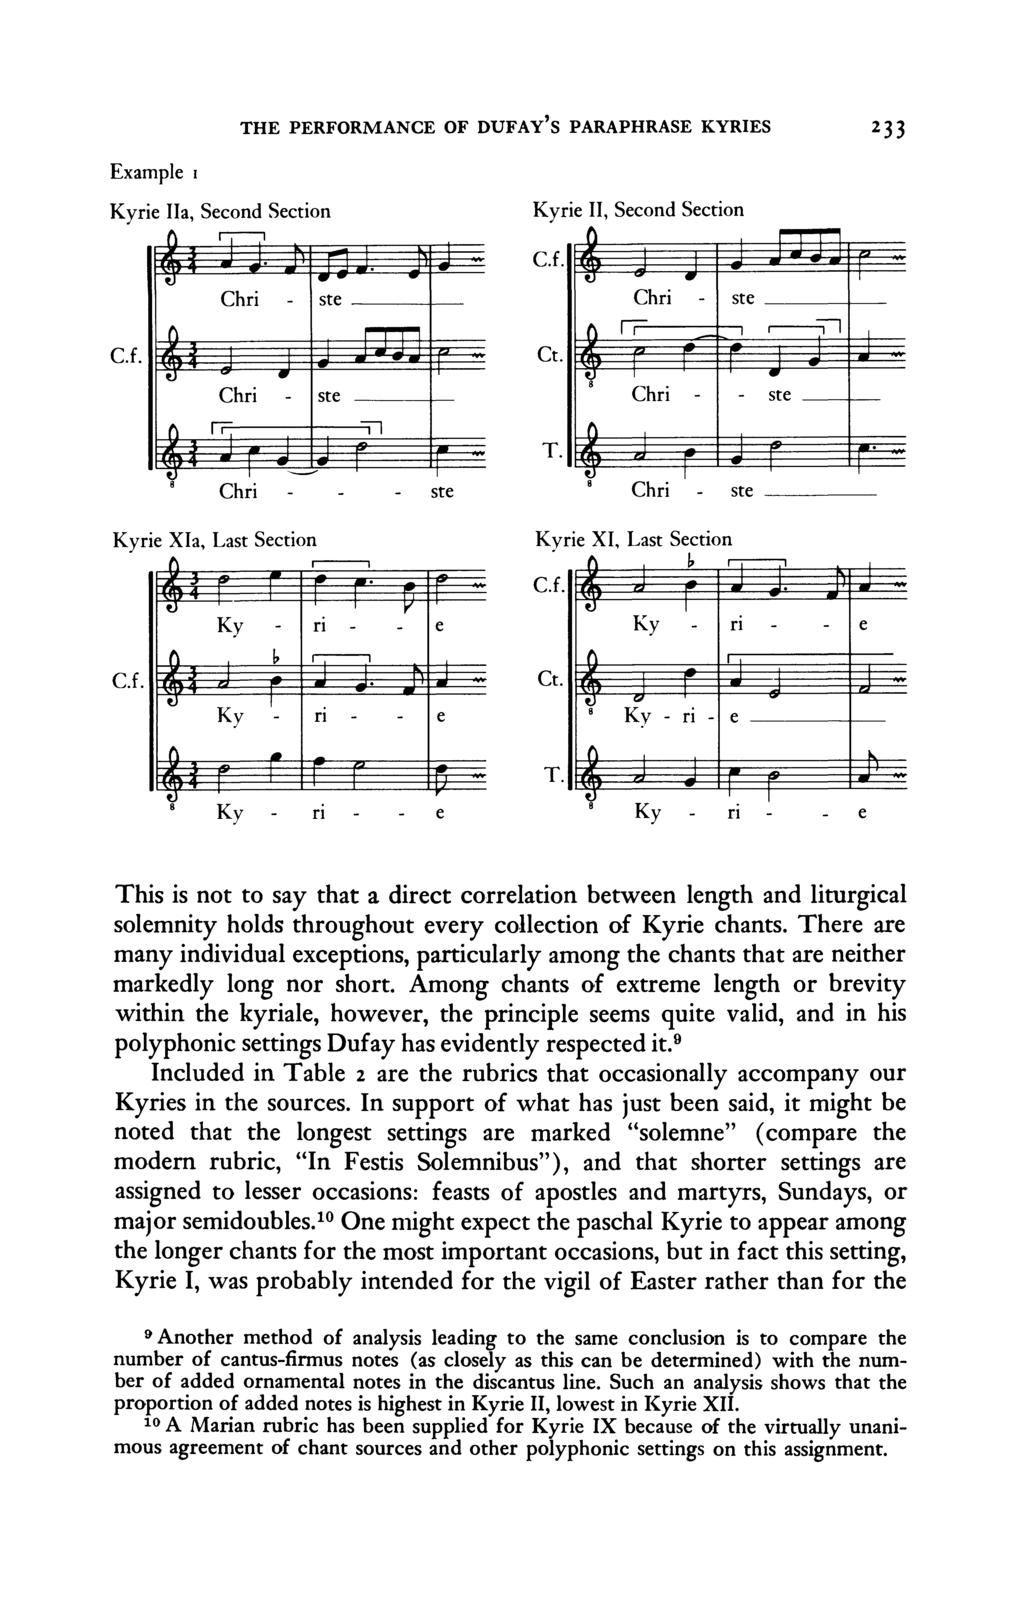 Example i Kyrie IIa, Second Section Kyrie THE PERFORMANCE OF DUFAY S PARAPHRASE KYRIES 233 II, Second Section C.f&% ".